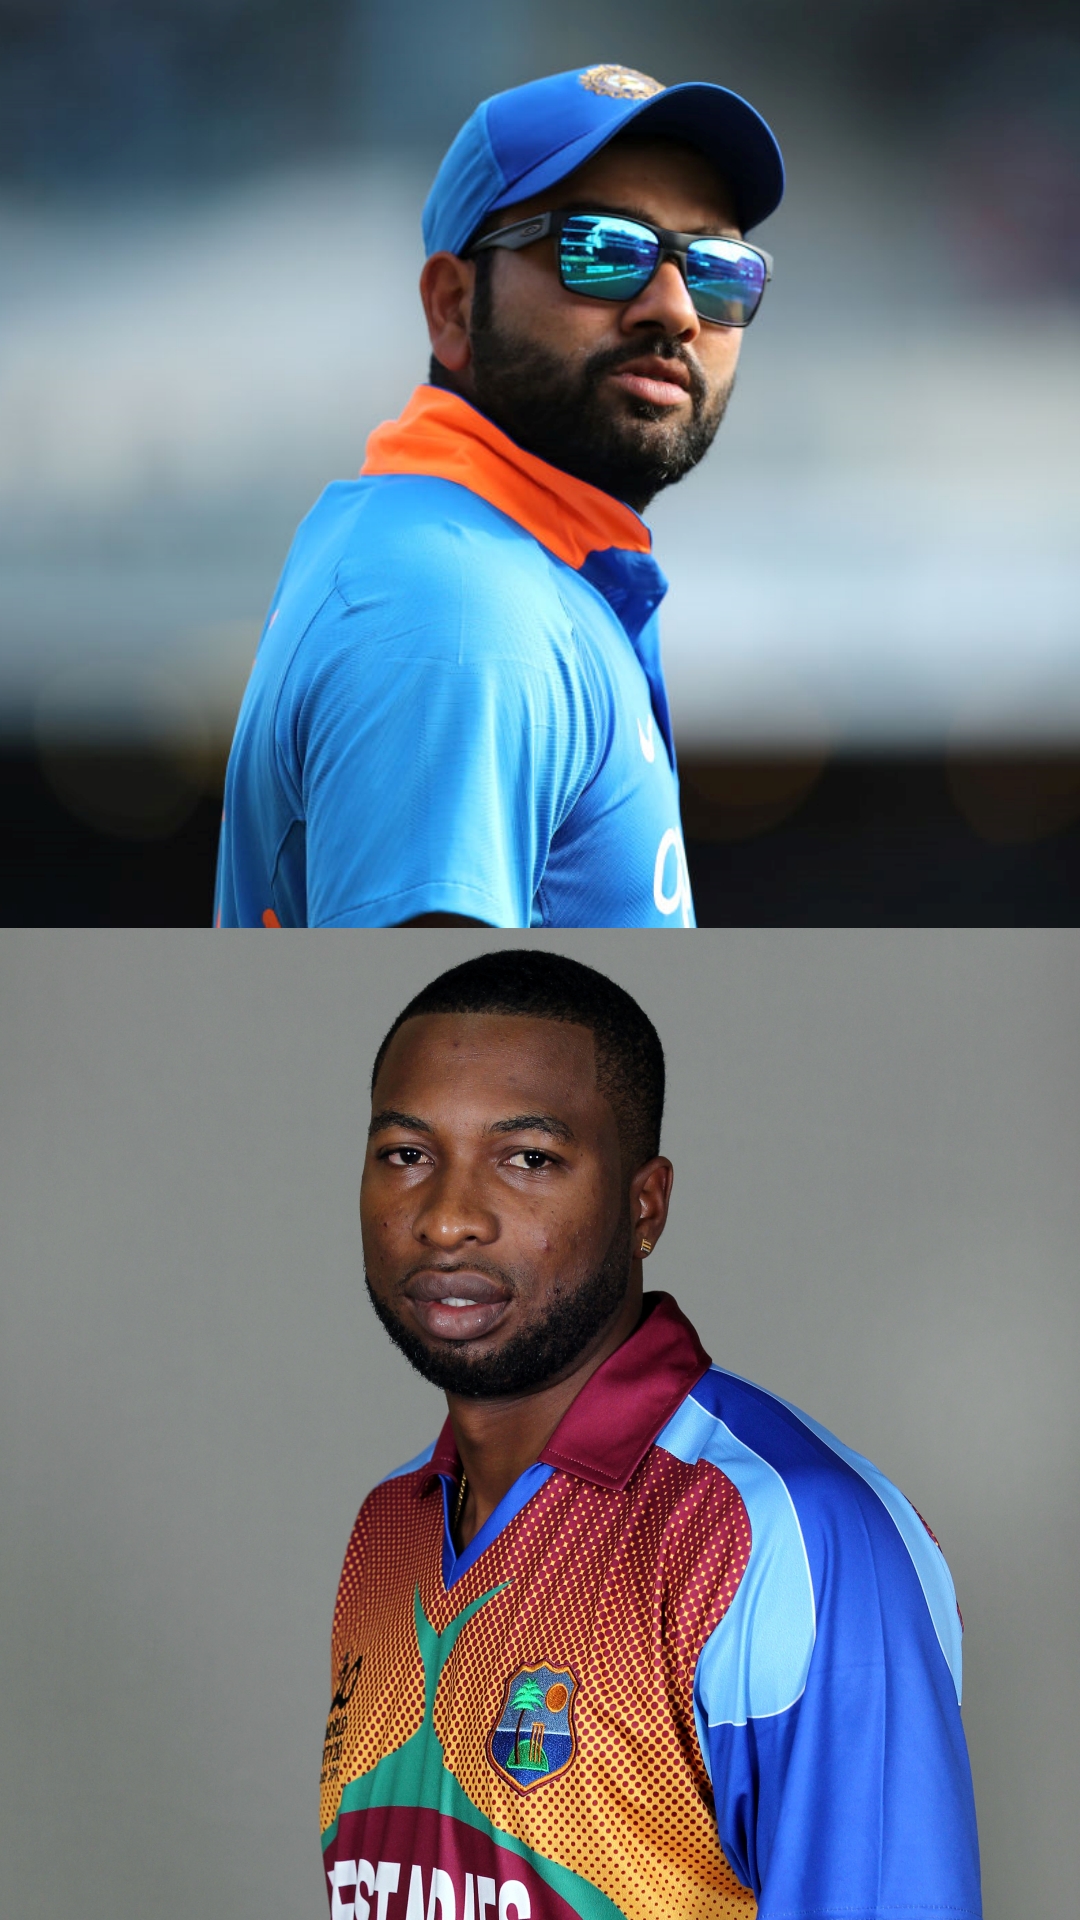 Rohit Sharma to Chris Gayle, list of batters with most sixes in T20 cricket